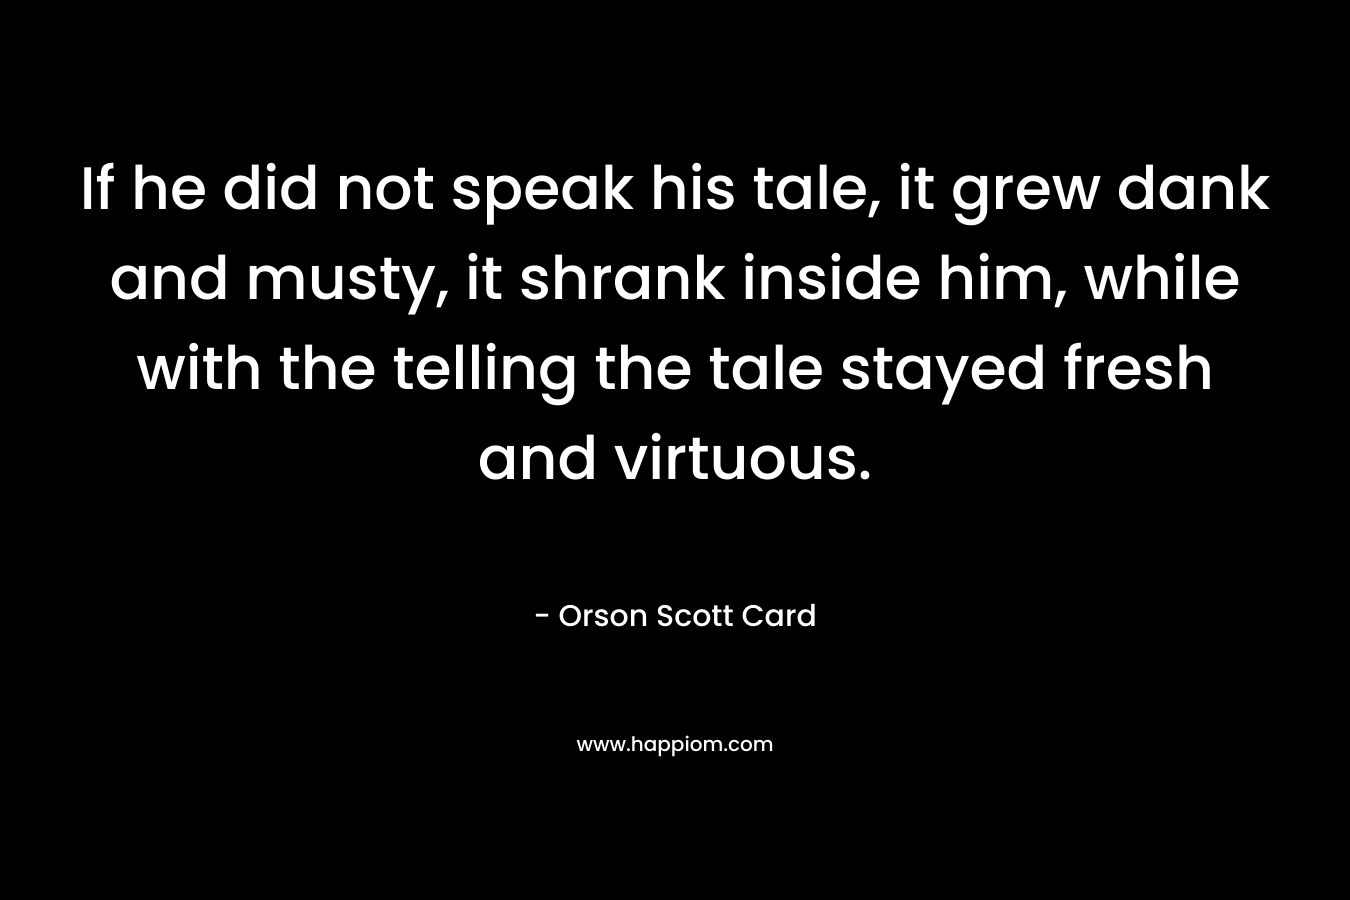 If he did not speak his tale, it grew dank and musty, it shrank inside him, while with the telling the tale stayed fresh and virtuous. – Orson Scott Card